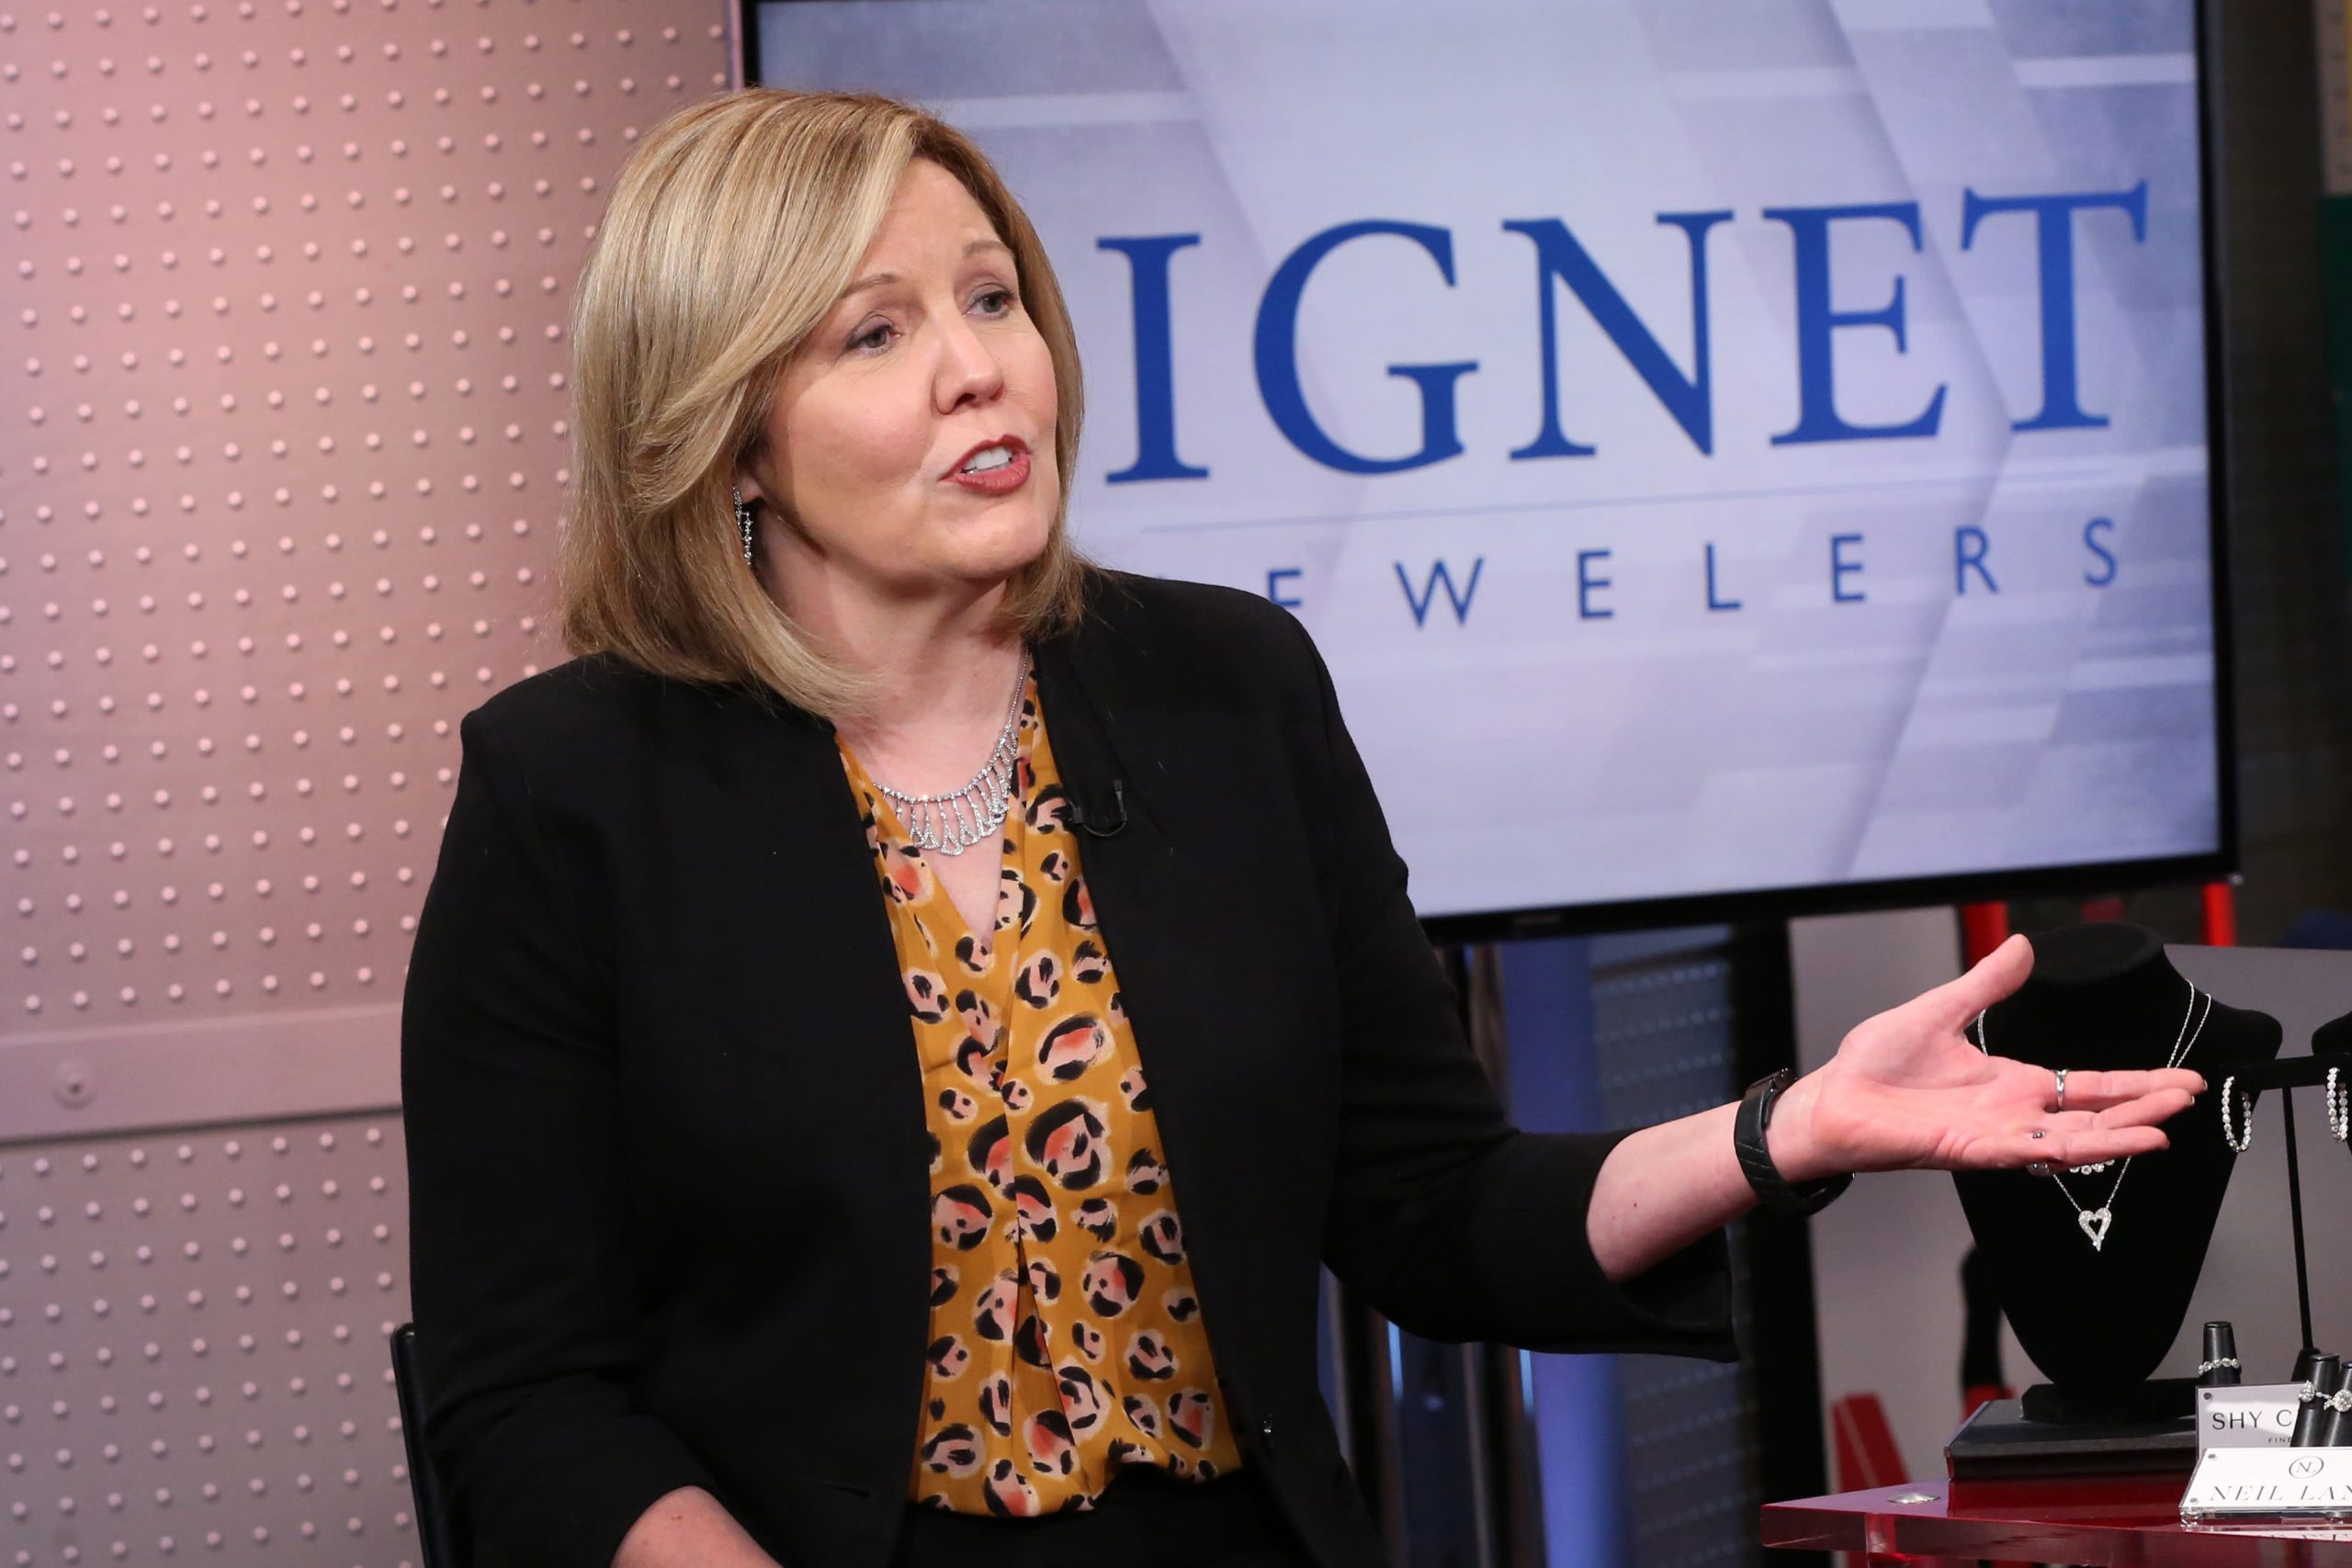 Signet CEO Gina Drosos sees extra energy forward for on-line jewellery gross sales